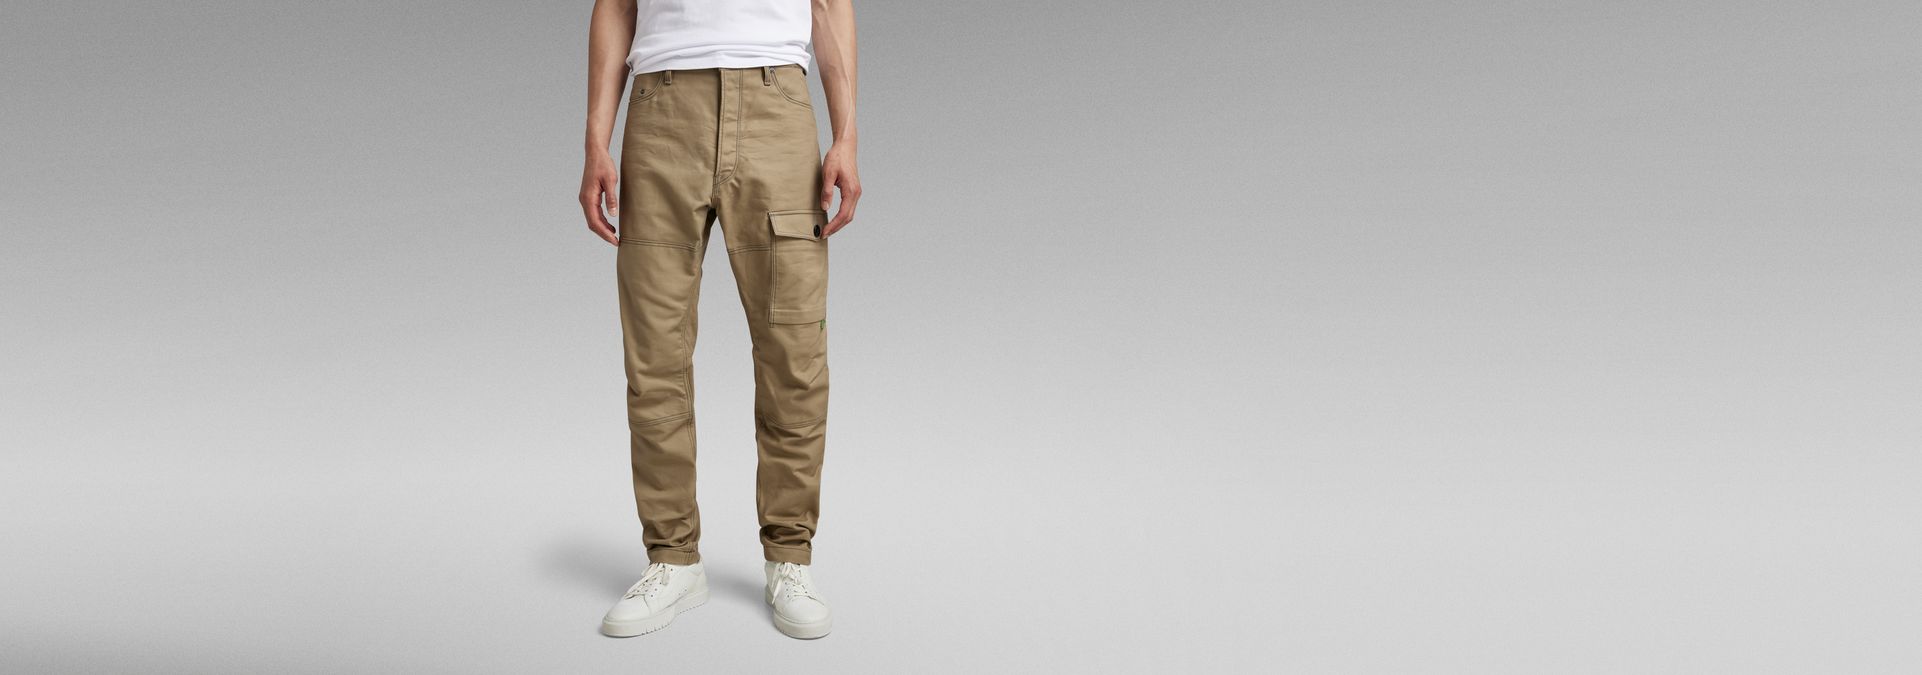 G-Star Raw Rovic New Tapered Fit Cargo Pants for Men